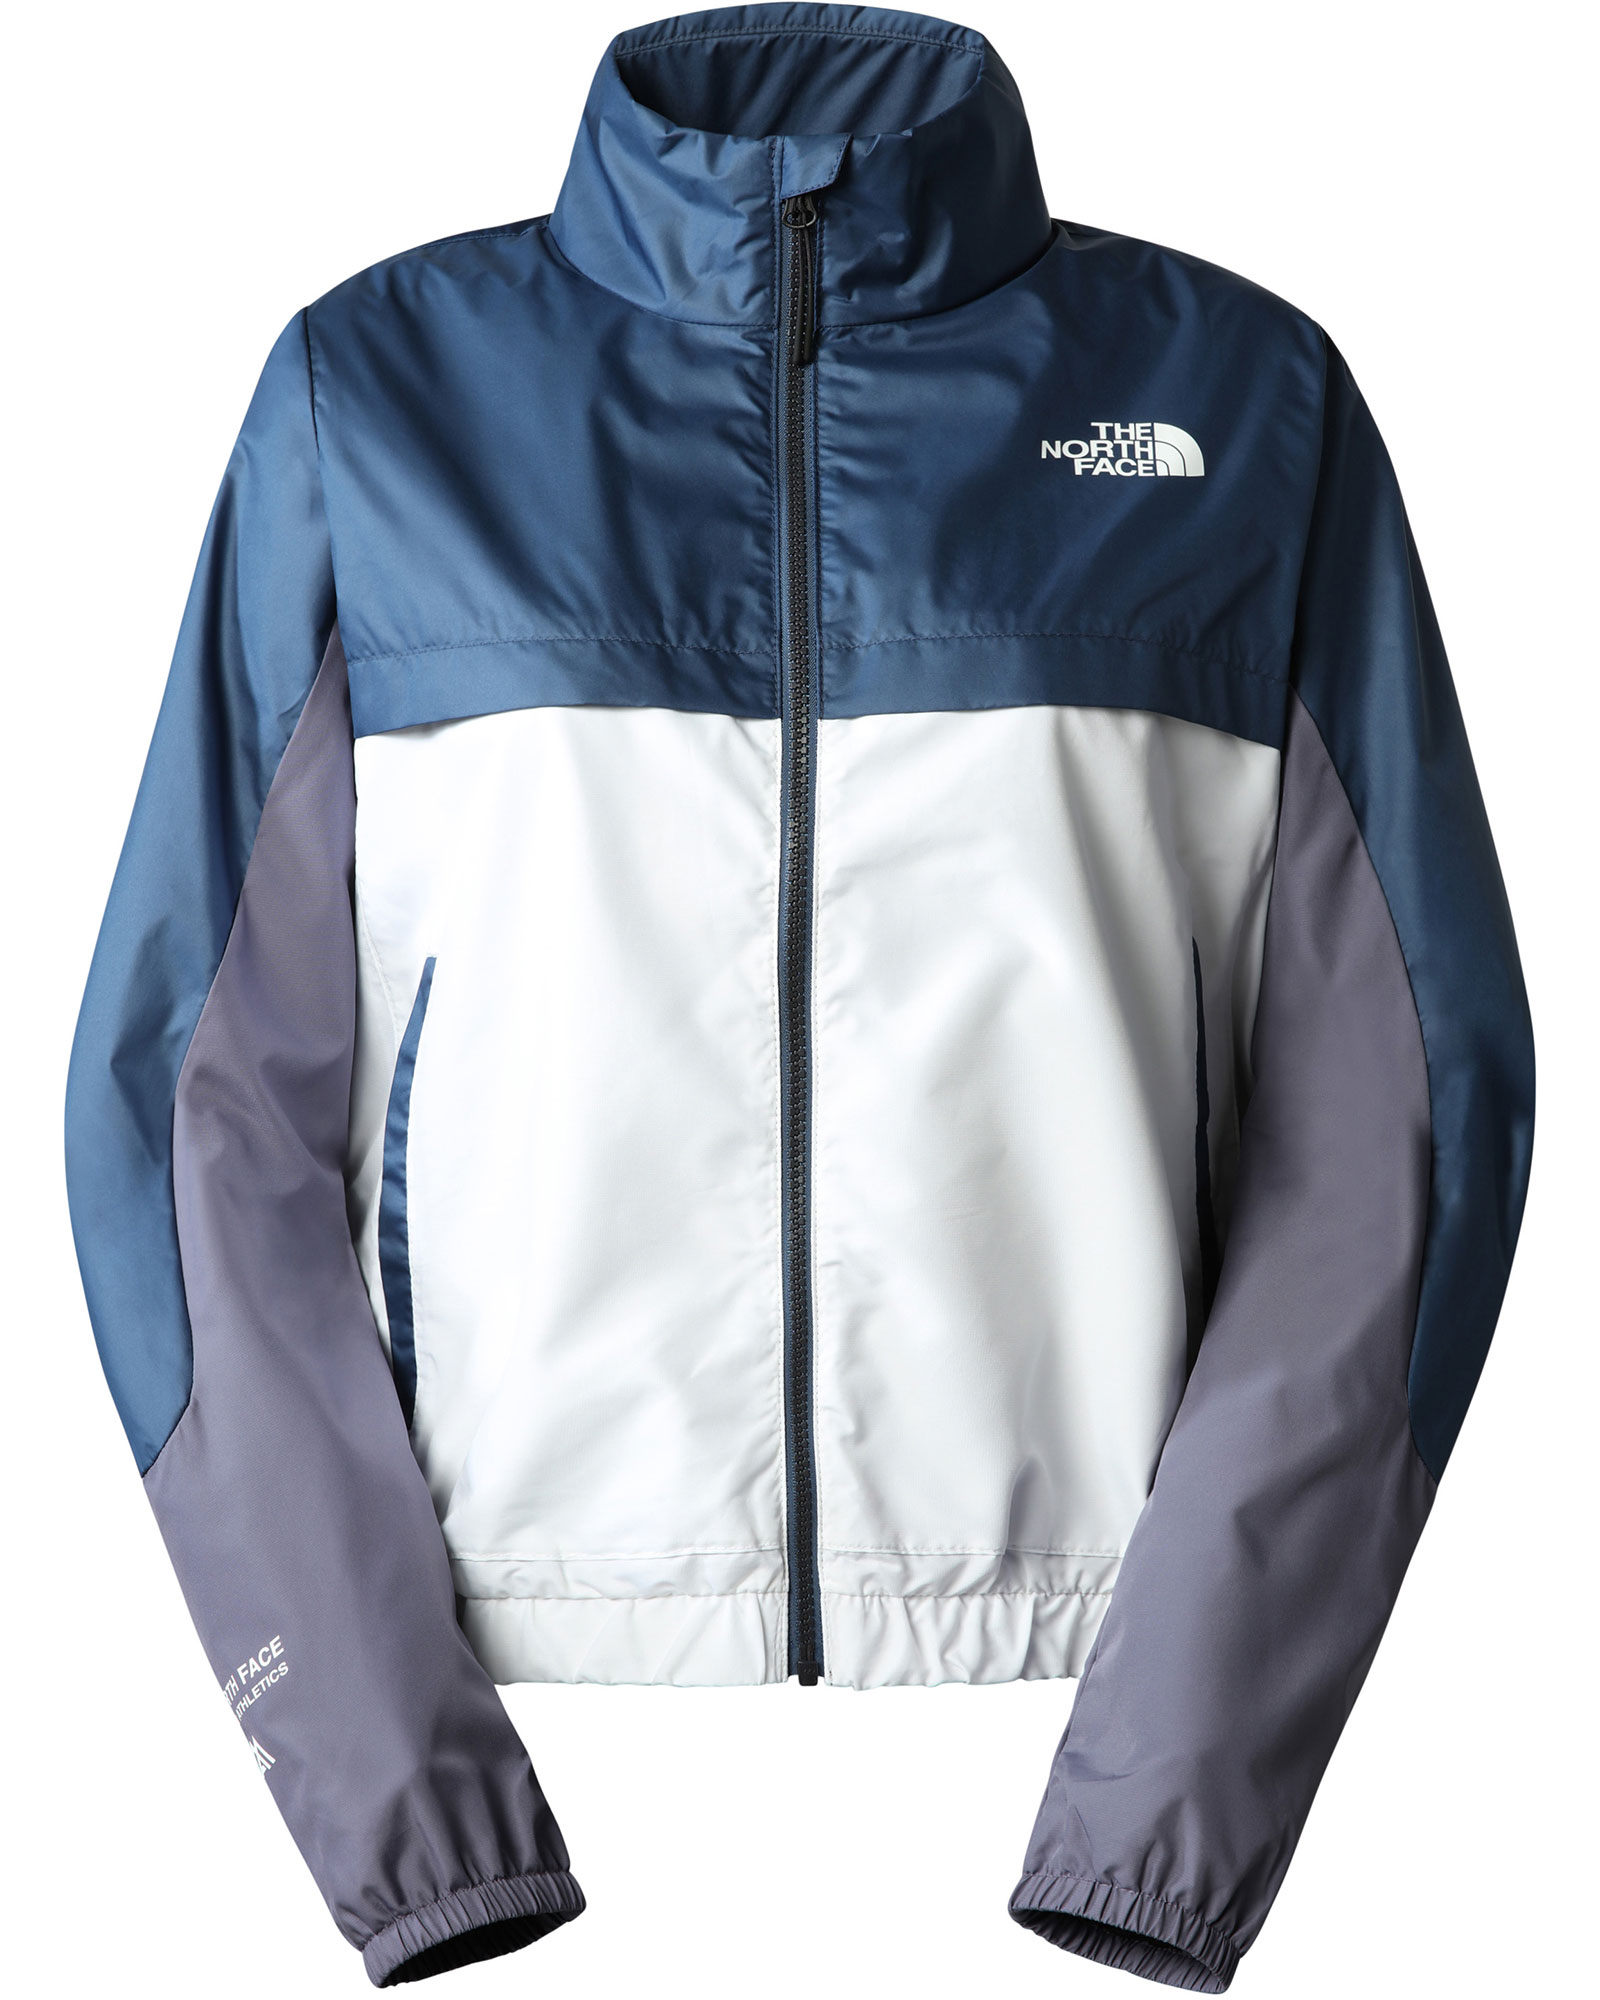 The North Face Womens Ma Wind Full Zip Jacket